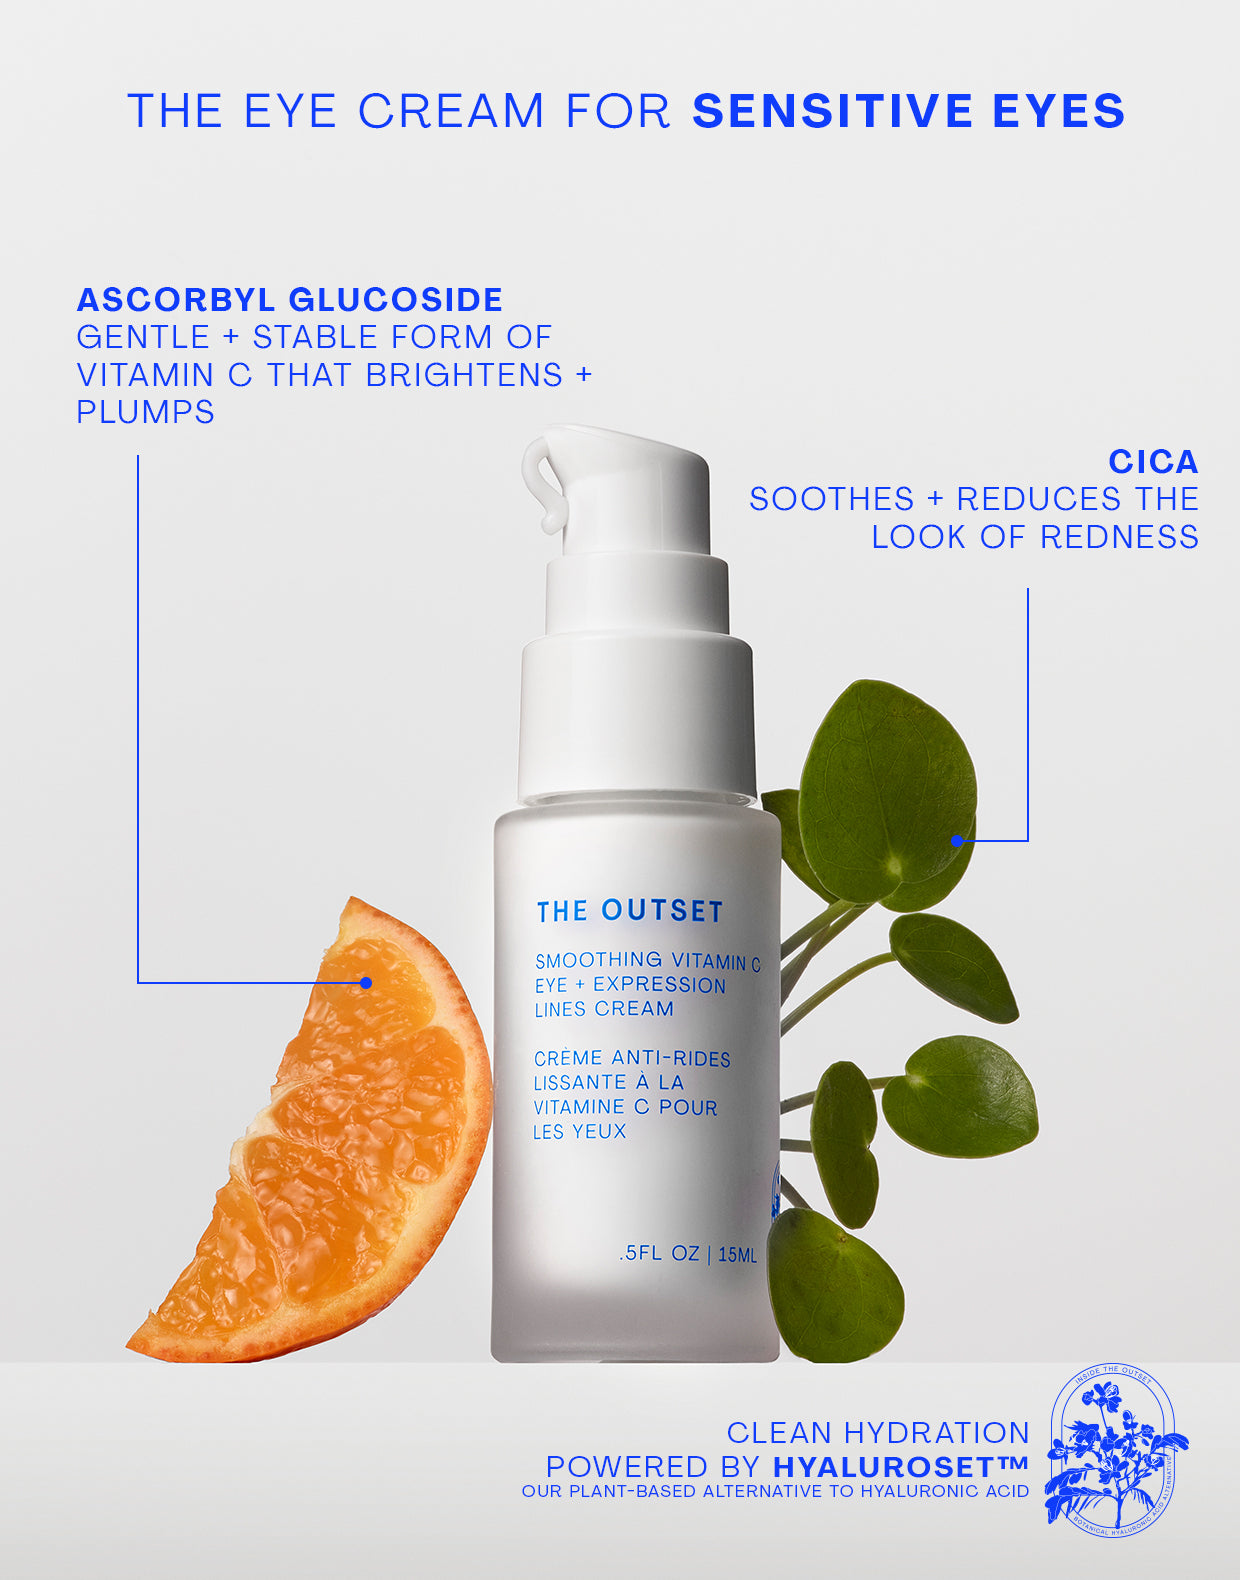 Photo of The Outset eye cream with ingredients; The eye cream for sensitive eyes; ascorbyl glucoside gentle + stable form of vitamin c that brightens + plumps; circa soothes + reduces the look of redness;  hyaluroset badge with text clean hydration powered by hyaluroset (TM), our plant-based alternative to hyaluronic acid